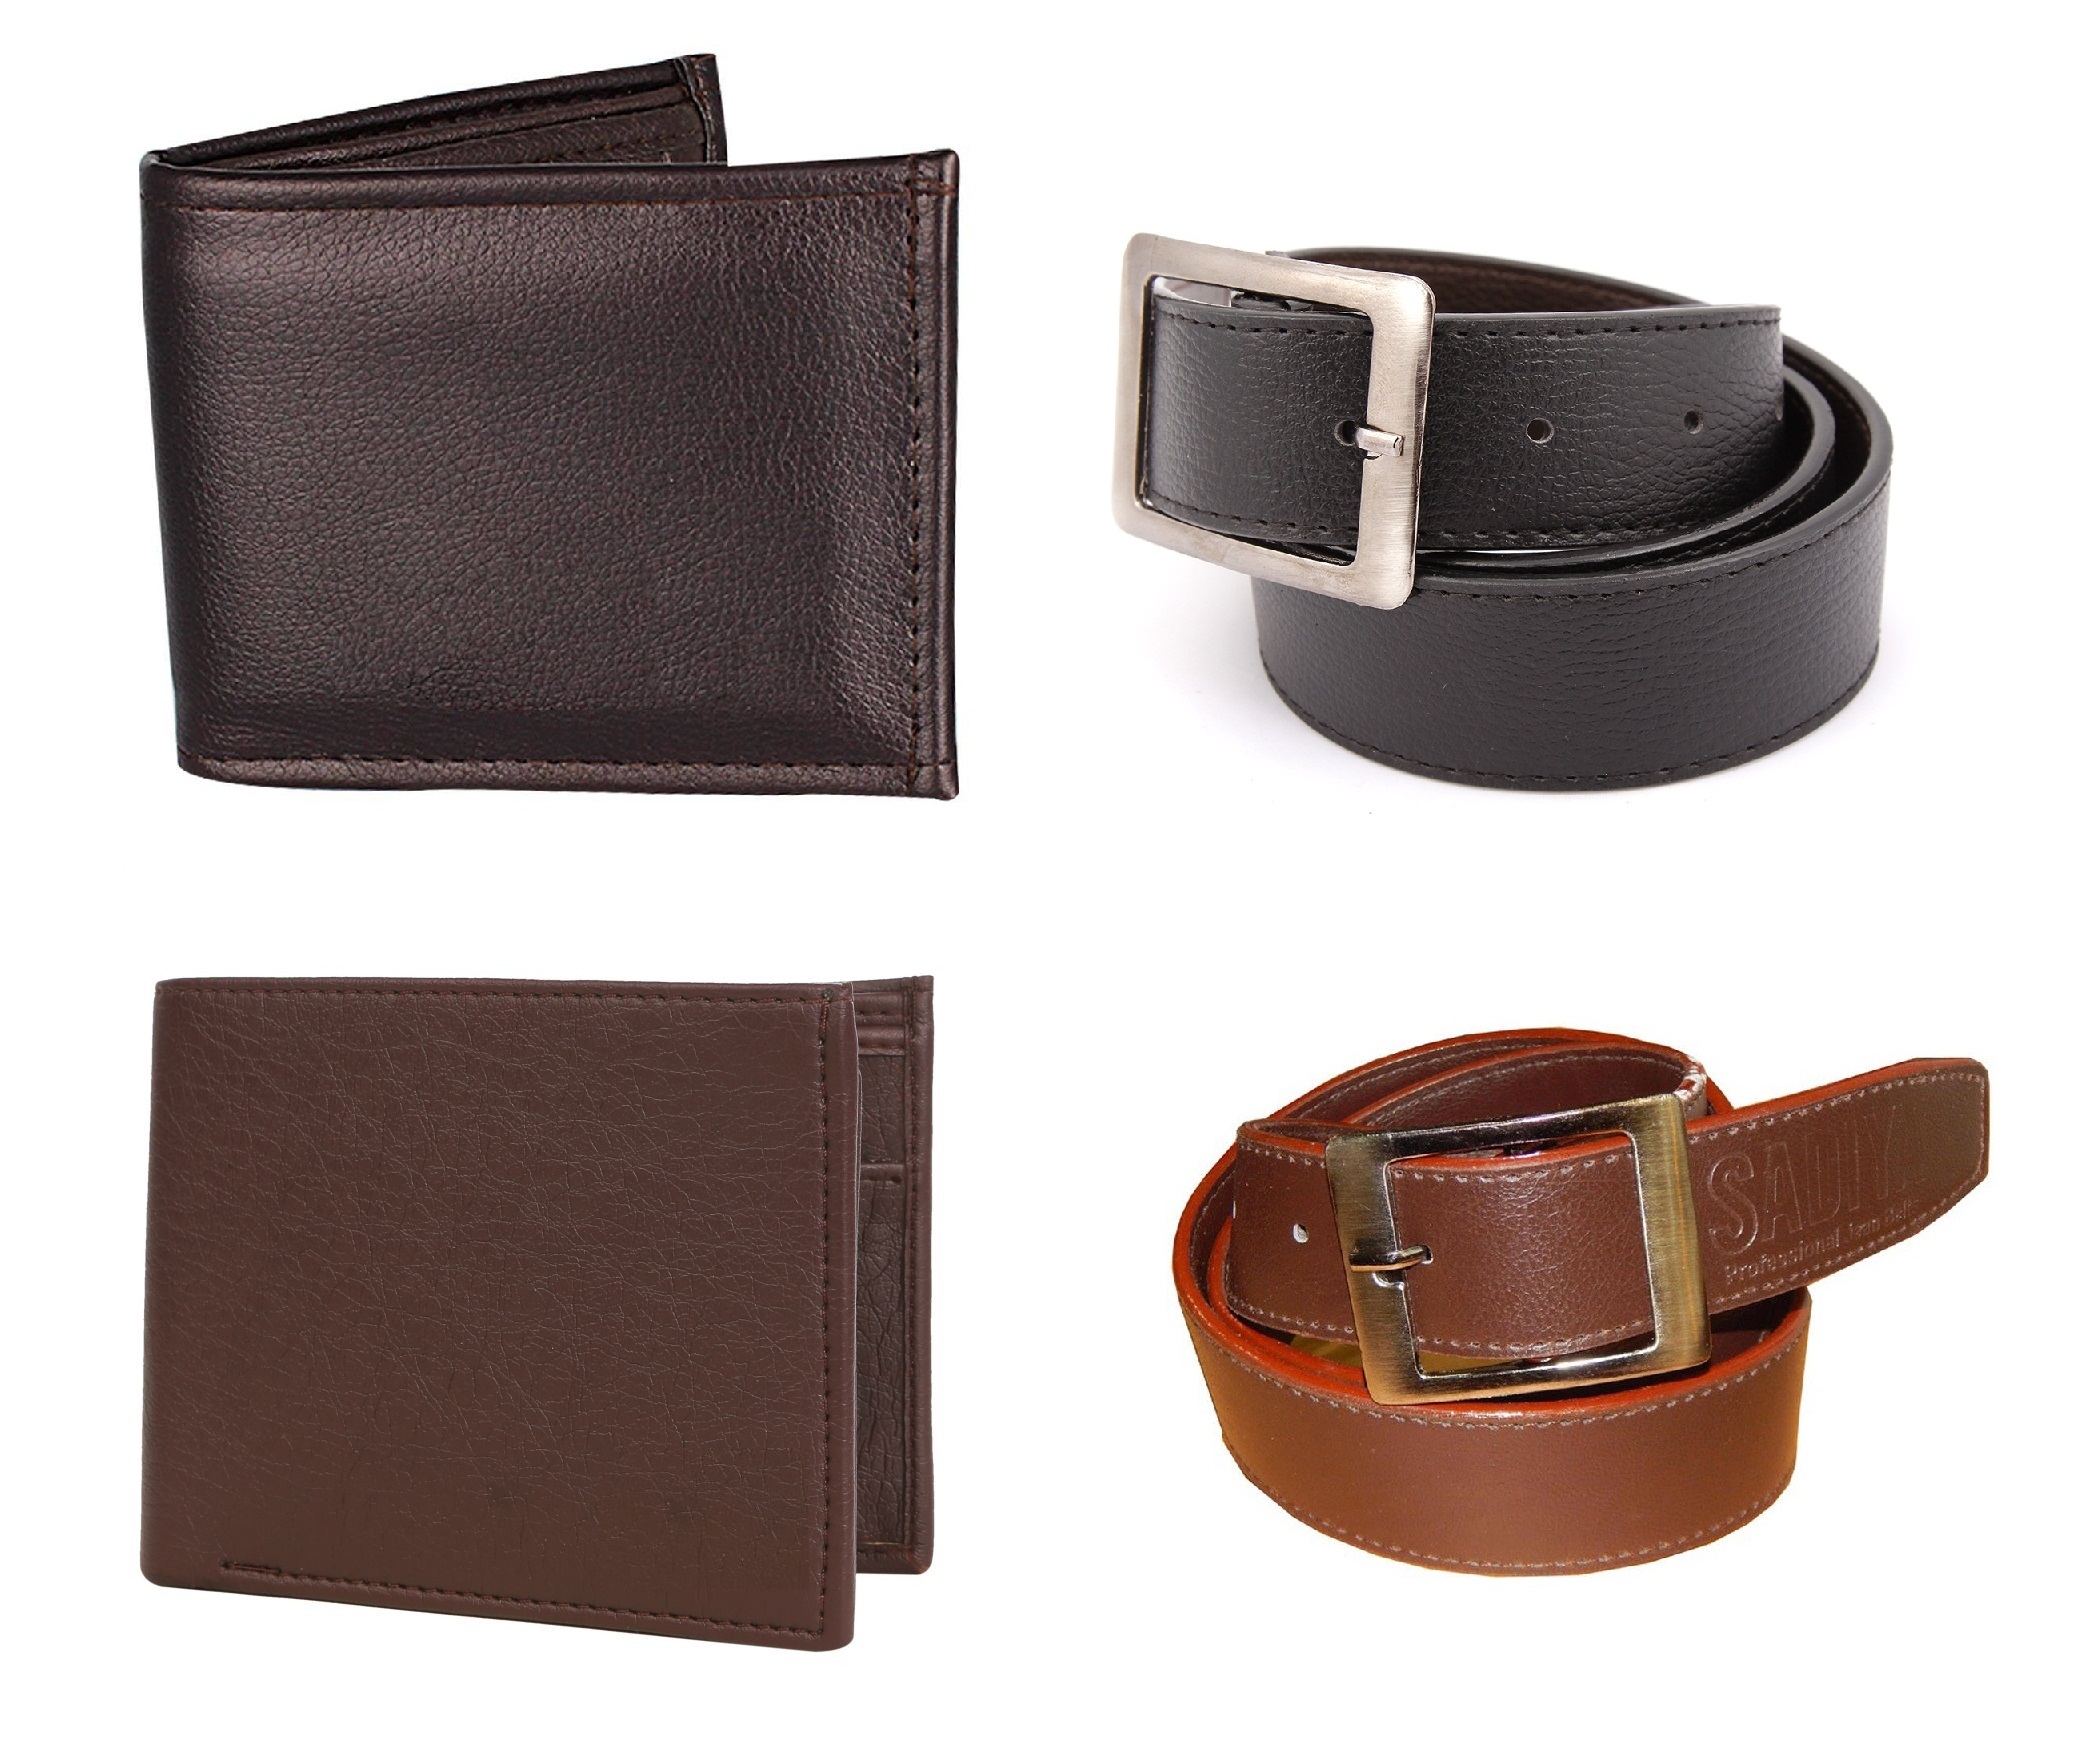 Buy Classic 2 Belts and 2 Wallets combo Online @ ₹599 from ShopClues